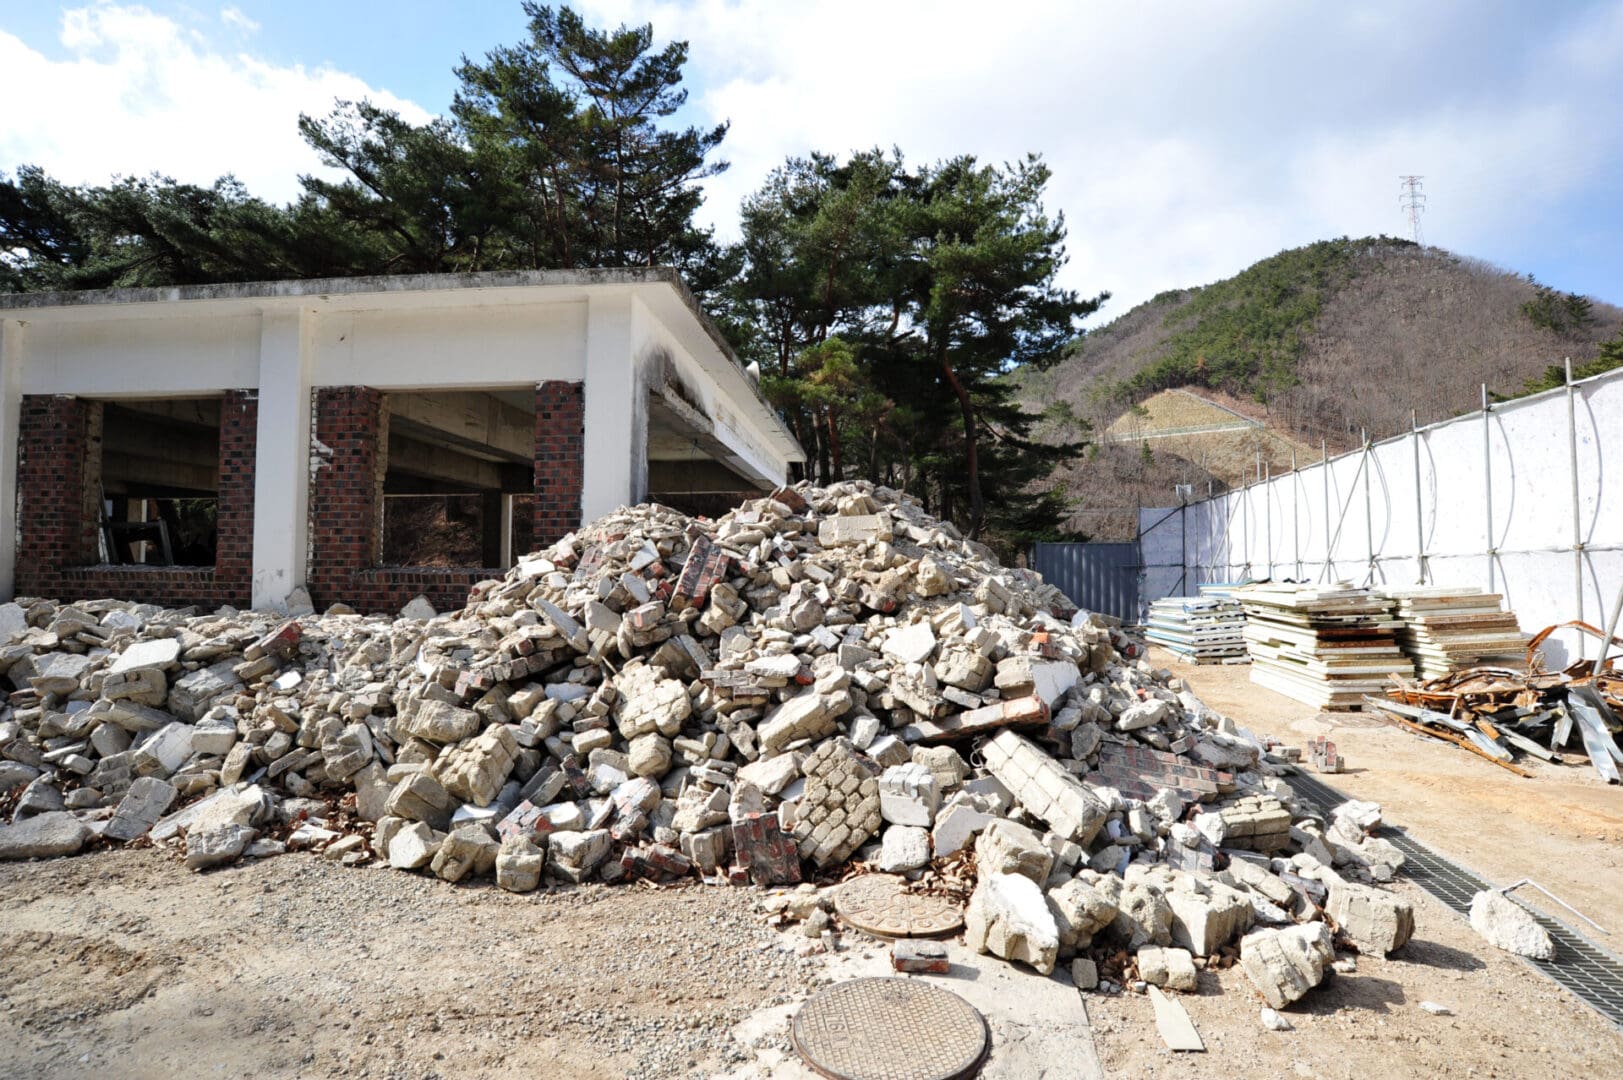 A pile of rocks in front of a building.